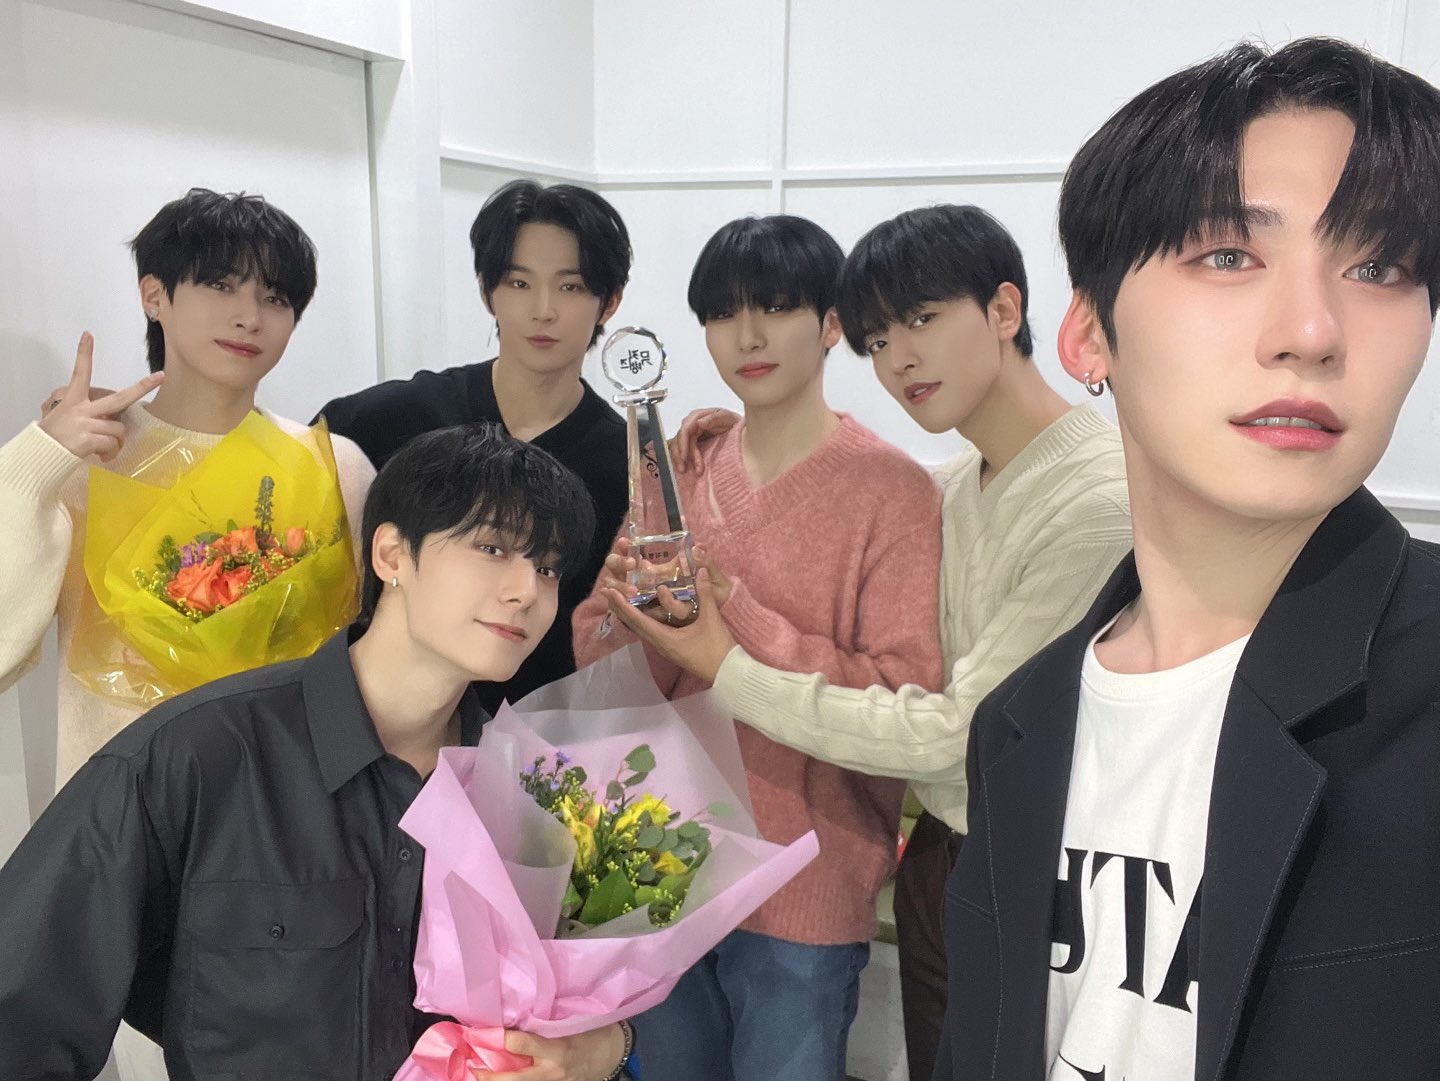 ONEUS wins “Music Bank”, IVE fans question KBS transmission points